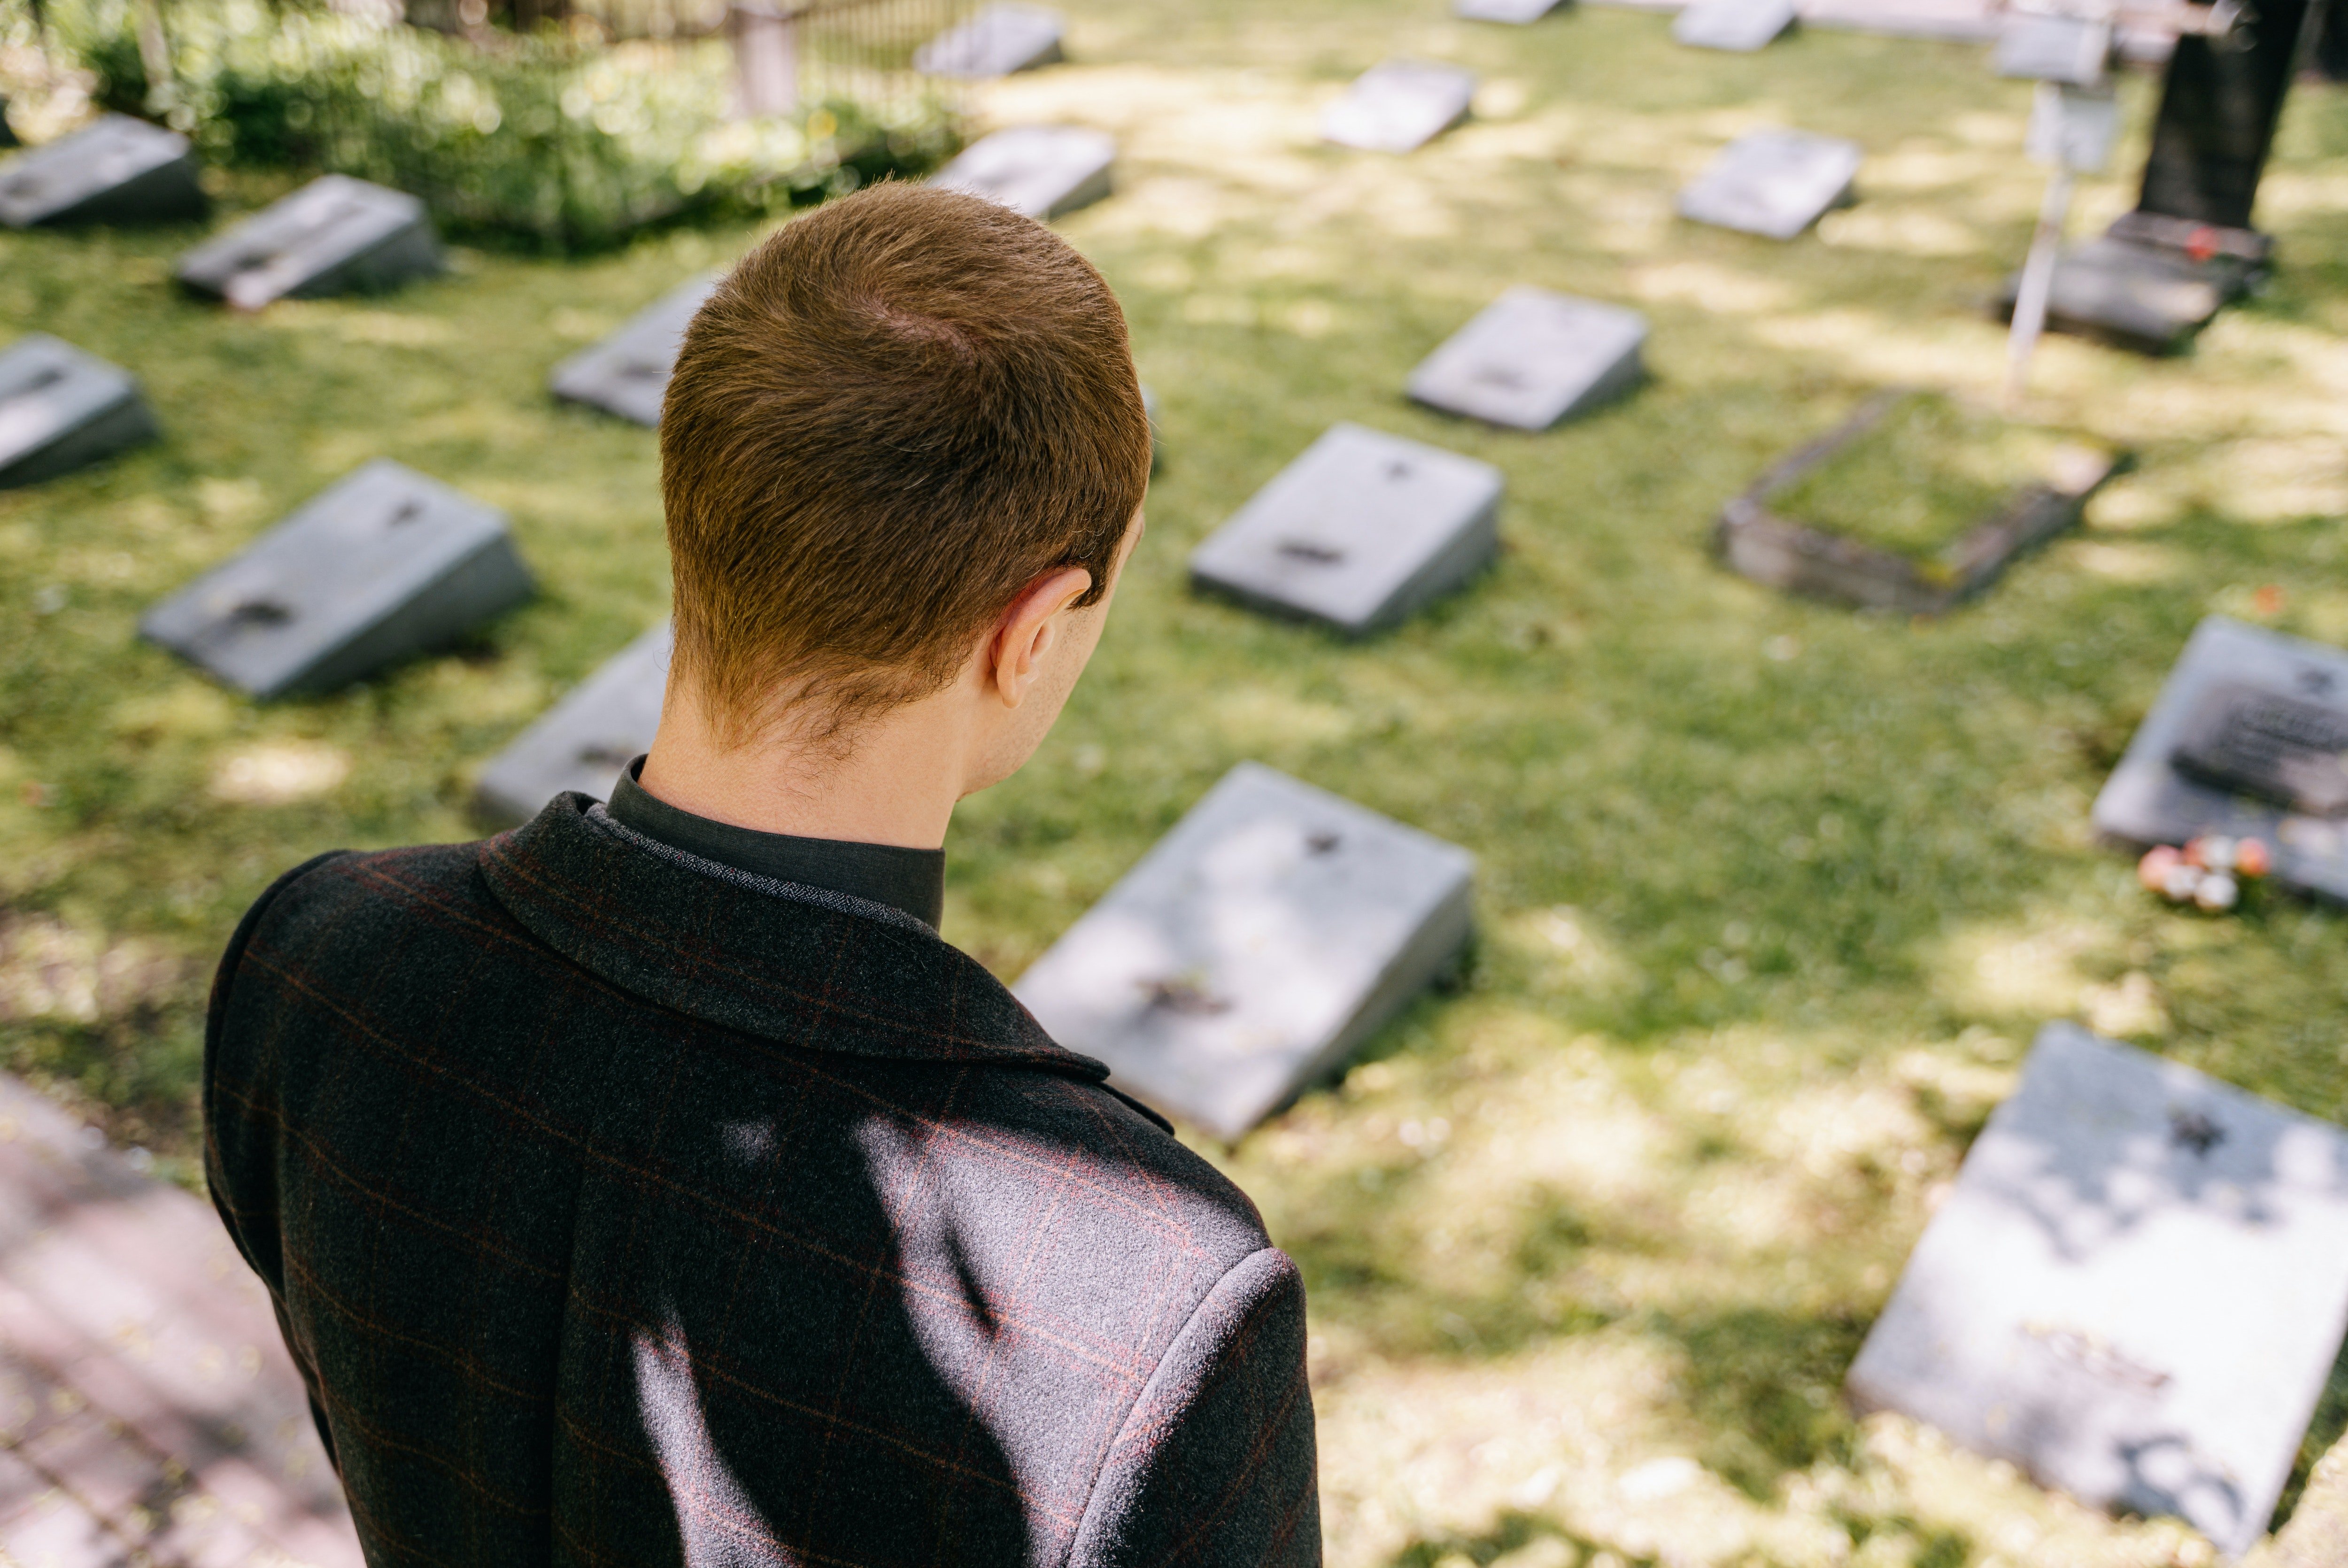 Even 10 years later, Todd couldn't move on from his dad's death & he missed him. | Source: Pexels